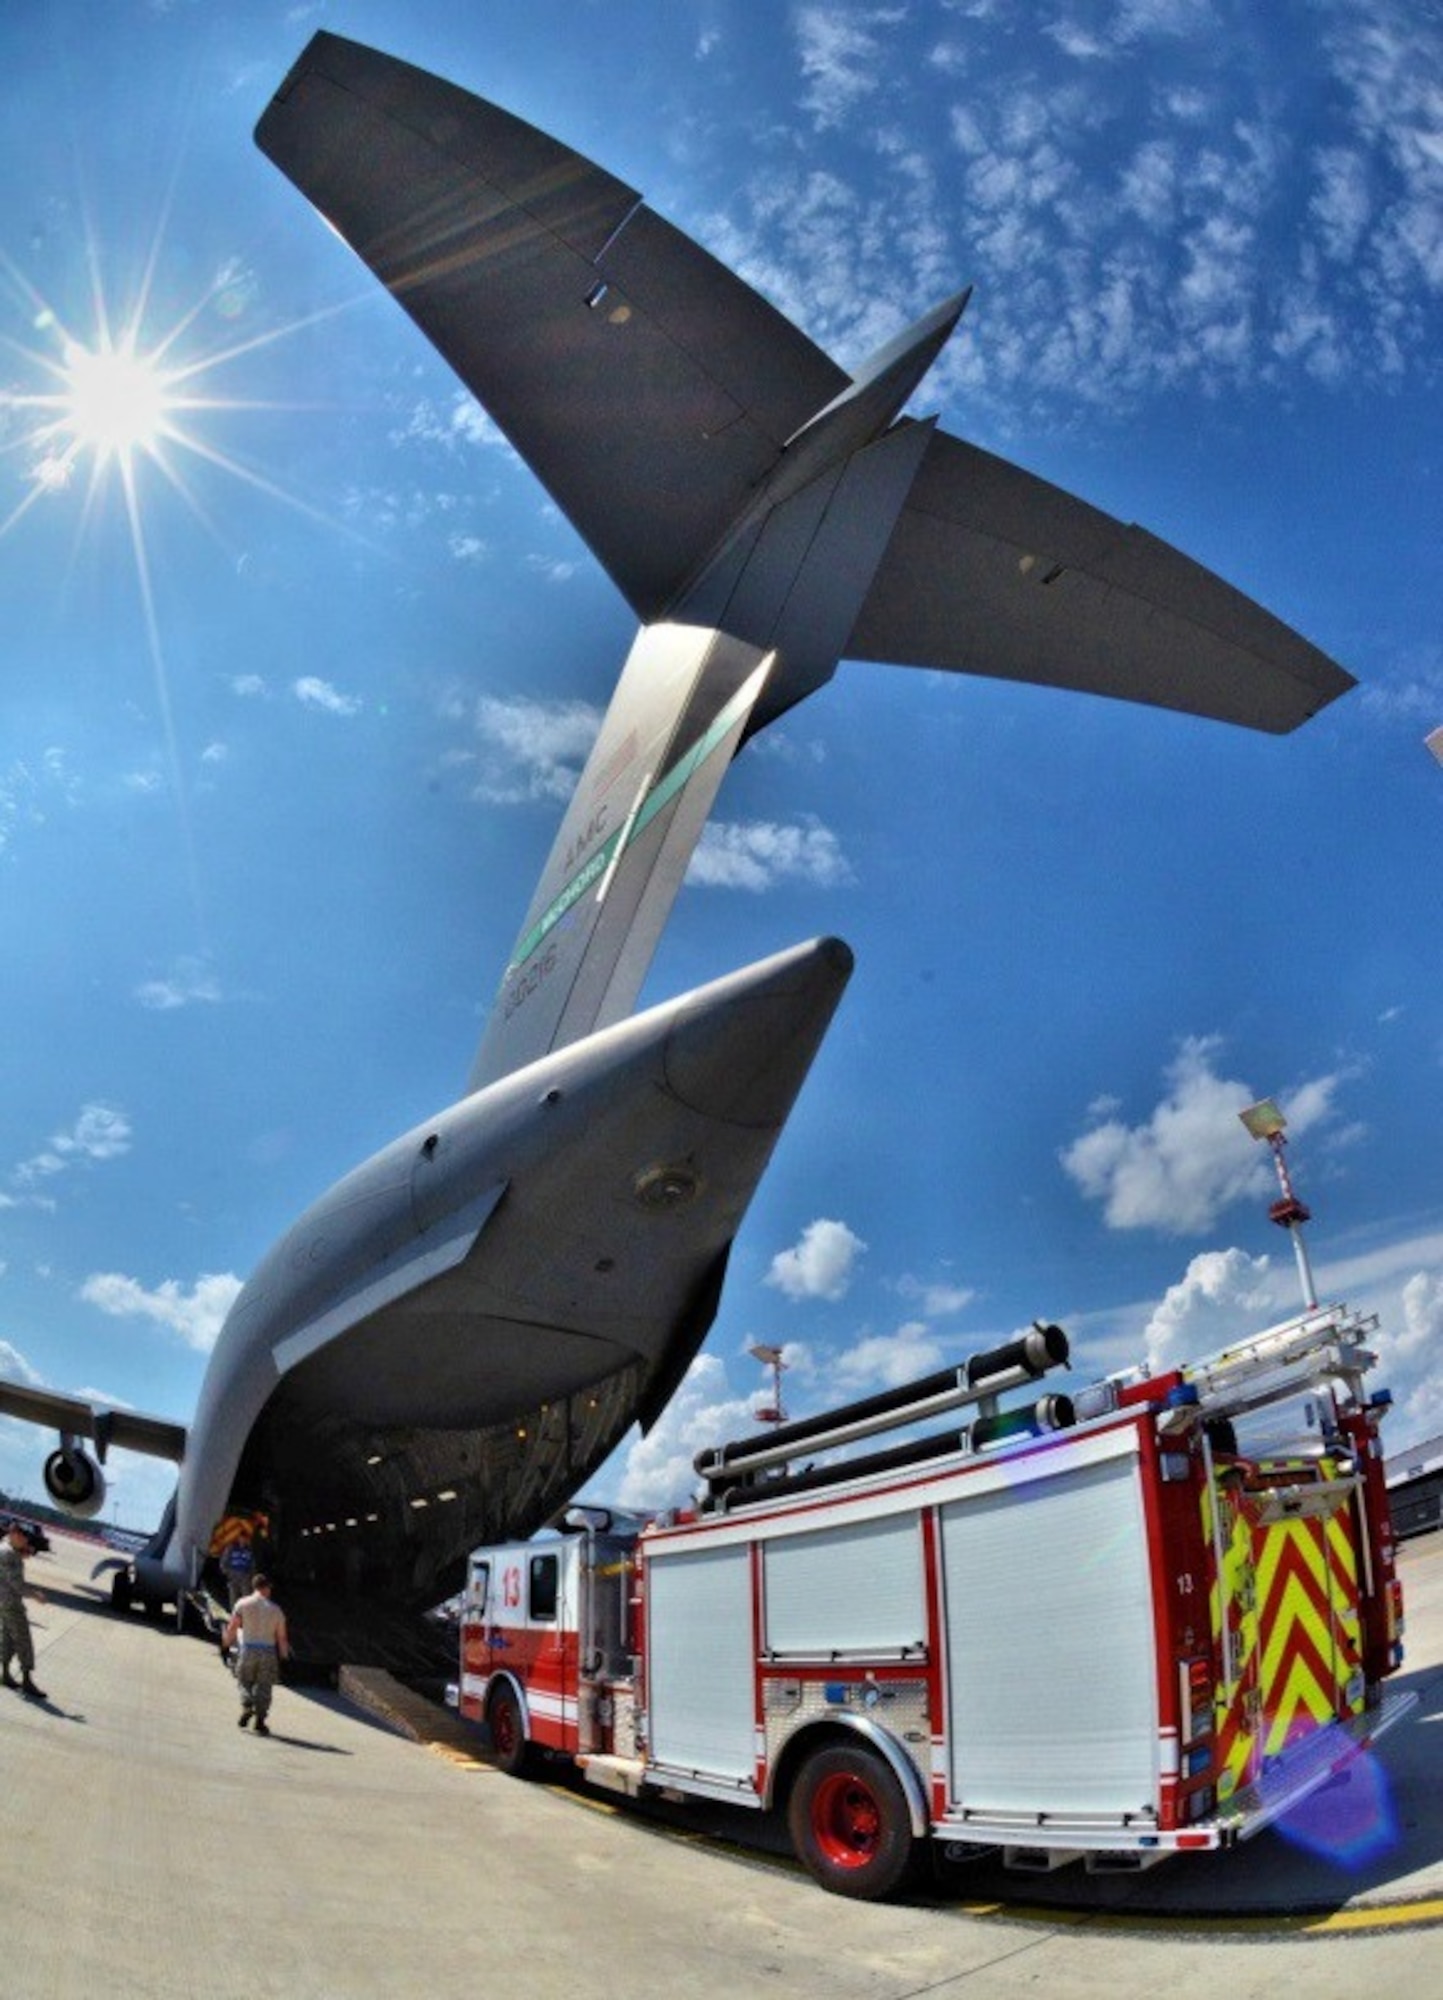 86th Airlift Wing fire engine awaiting upload onto C-17 Globemaster. (Courtesy Photo by Capt Jose A. Quintanilla)